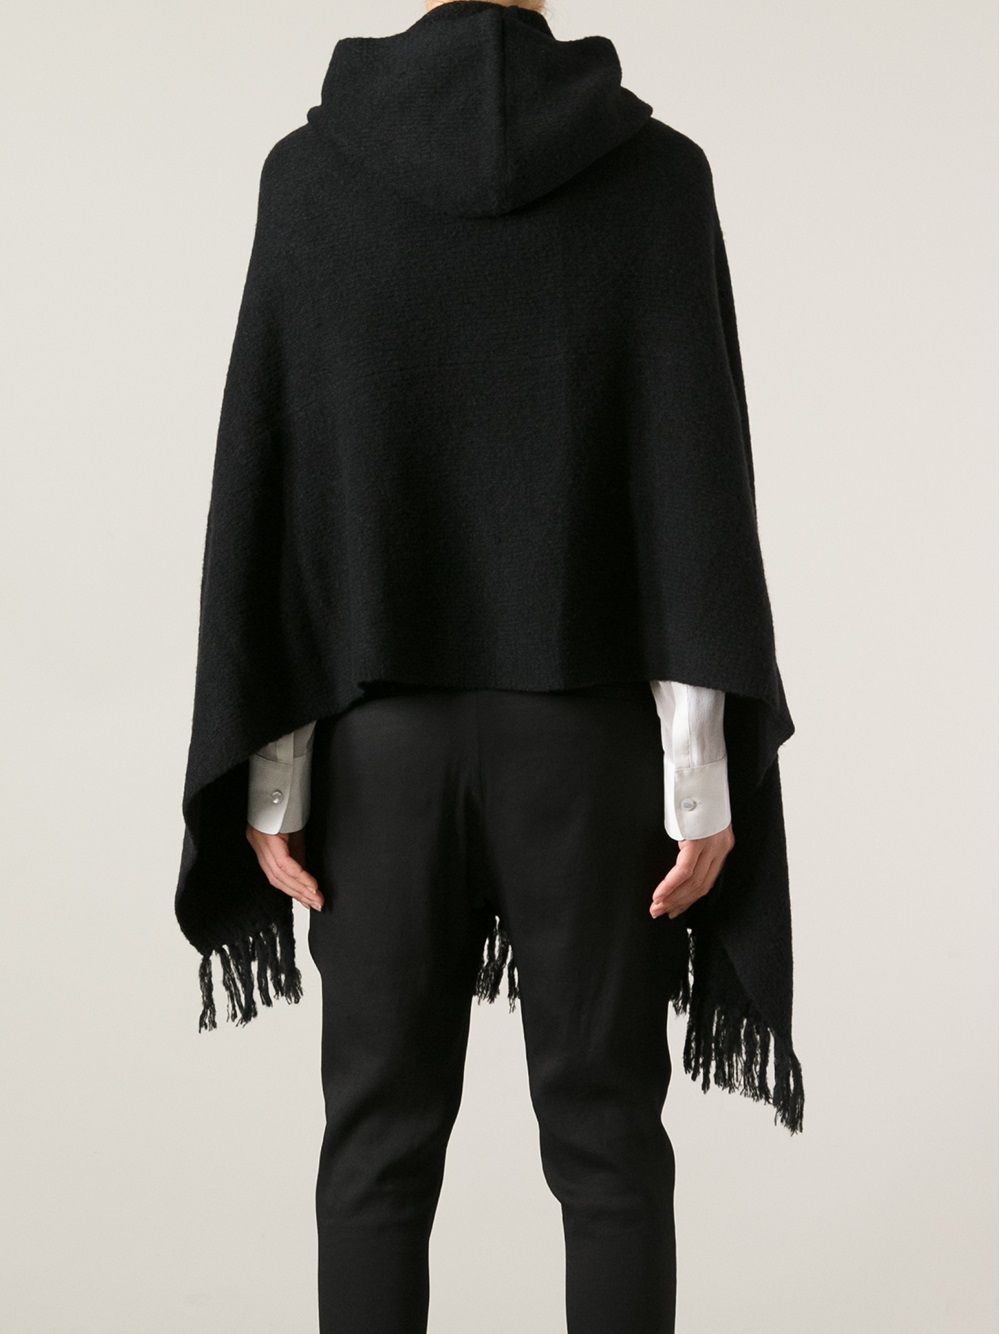 Lyst - Zucca Hooded Poncho in Black